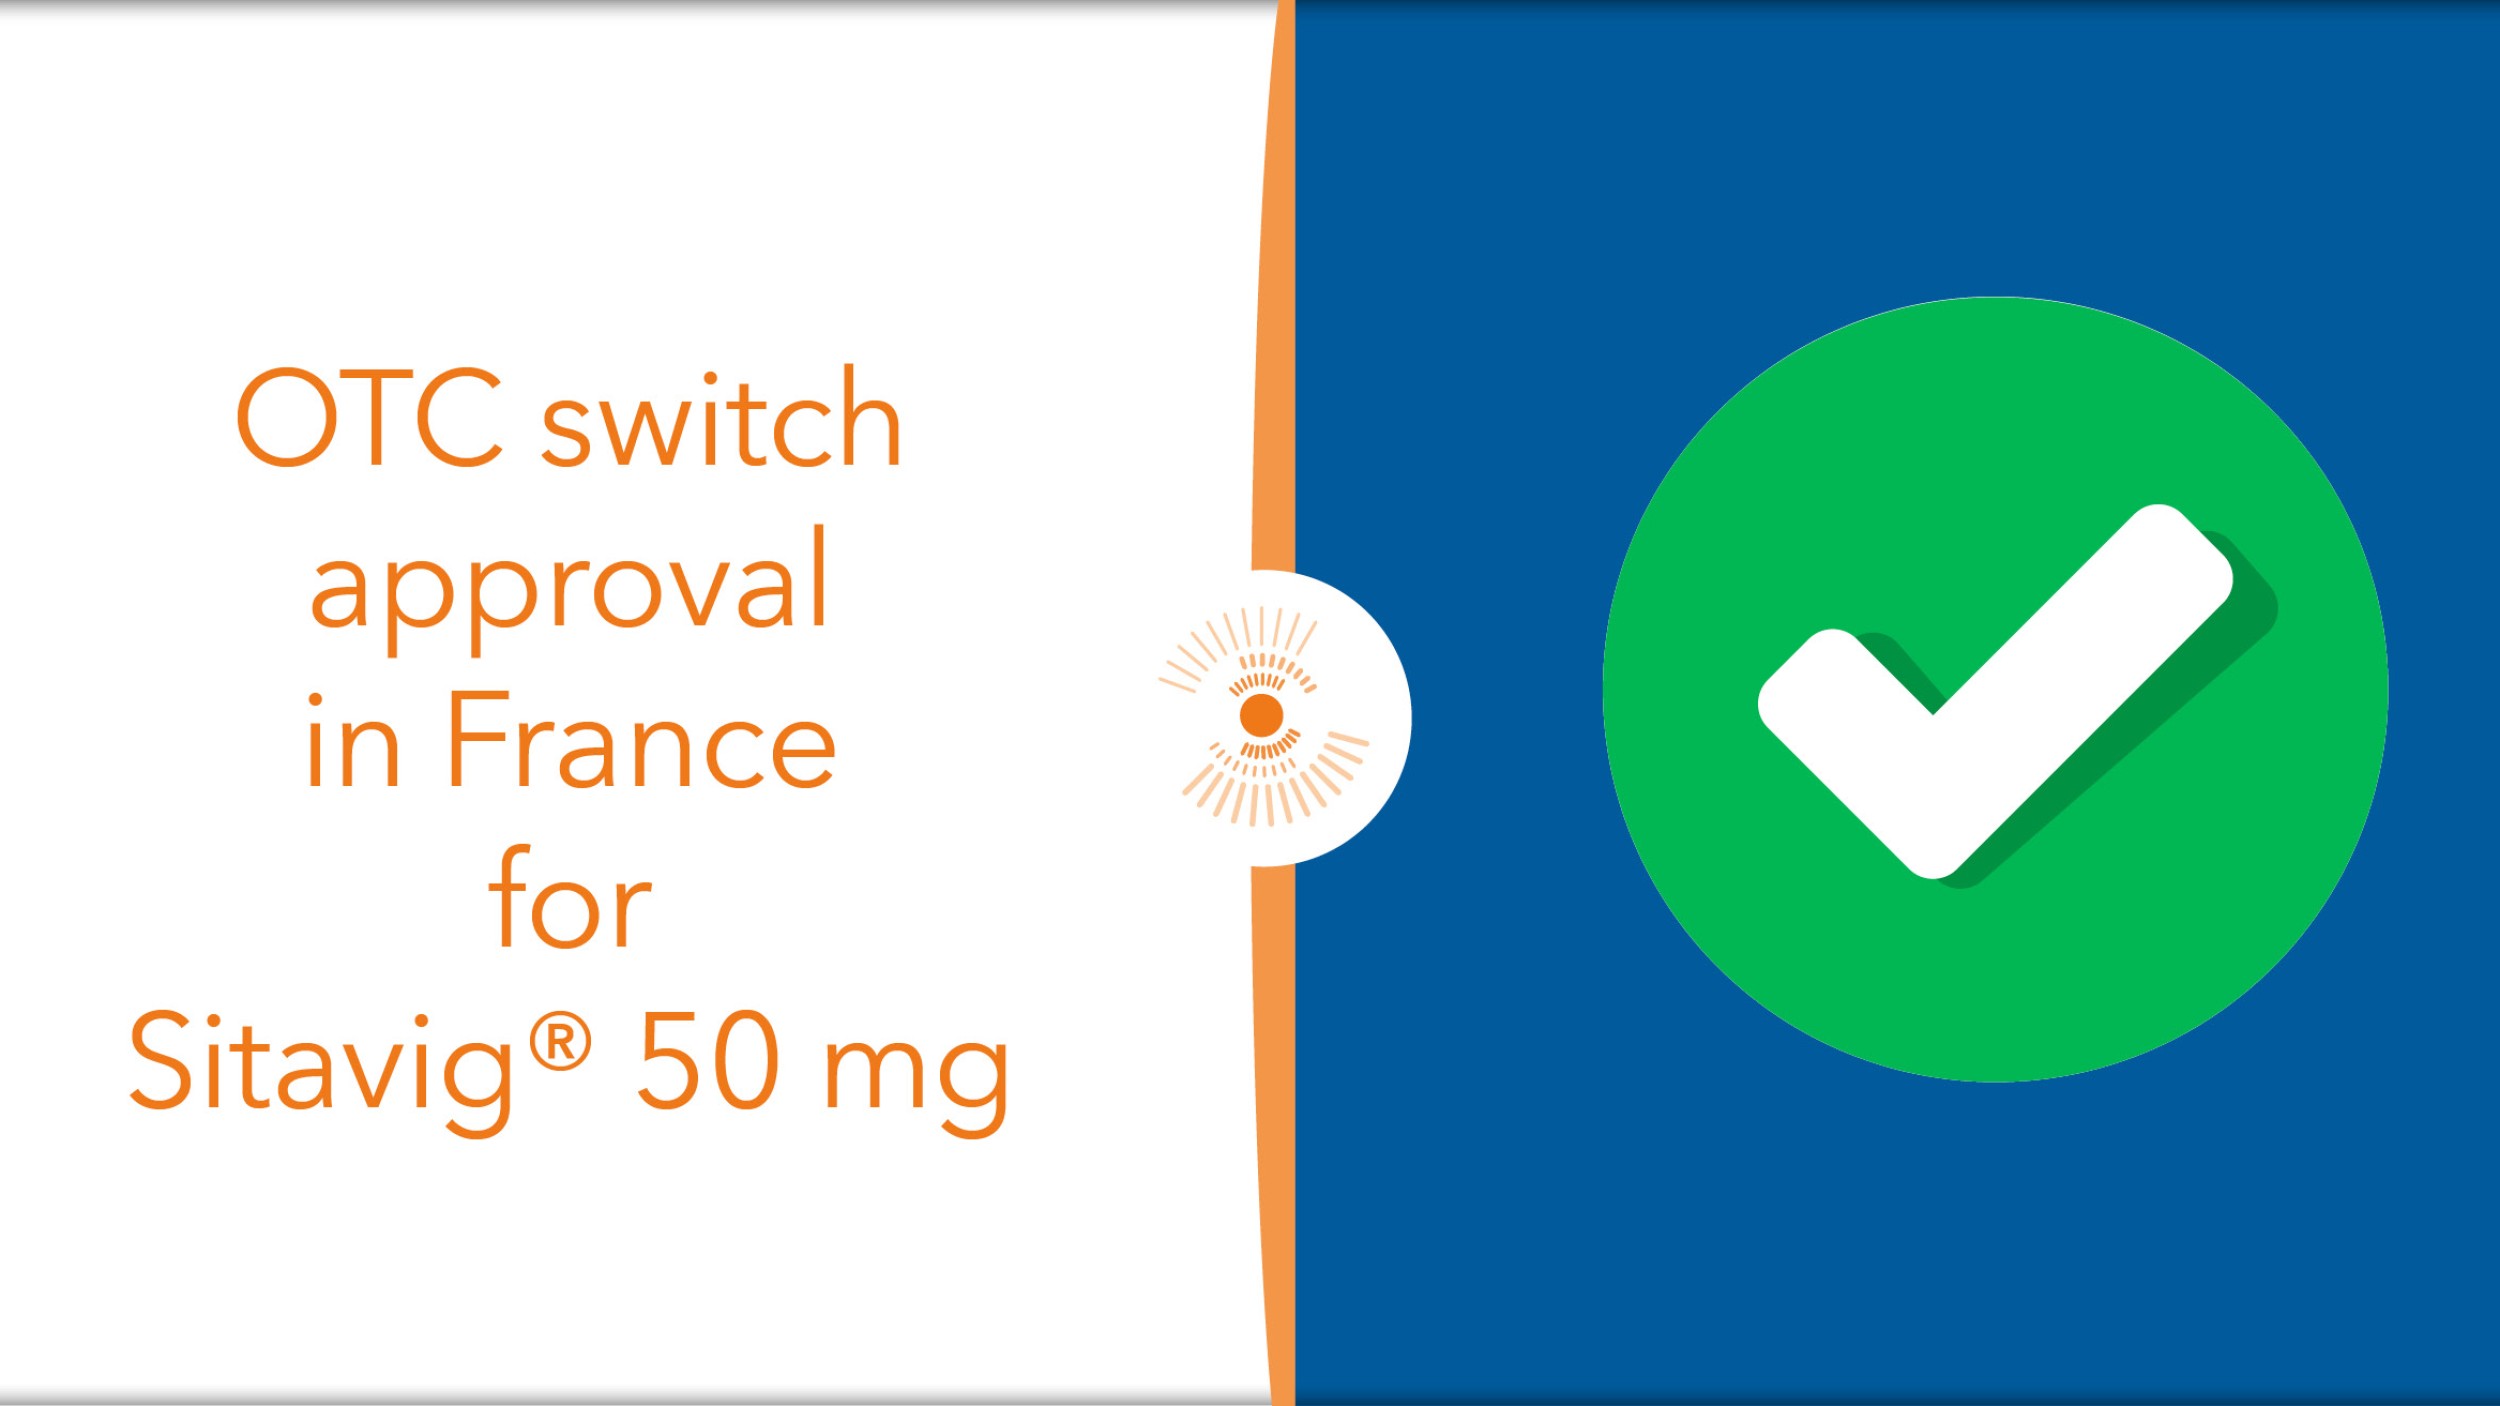 OTC switch approval for SitavigFrance